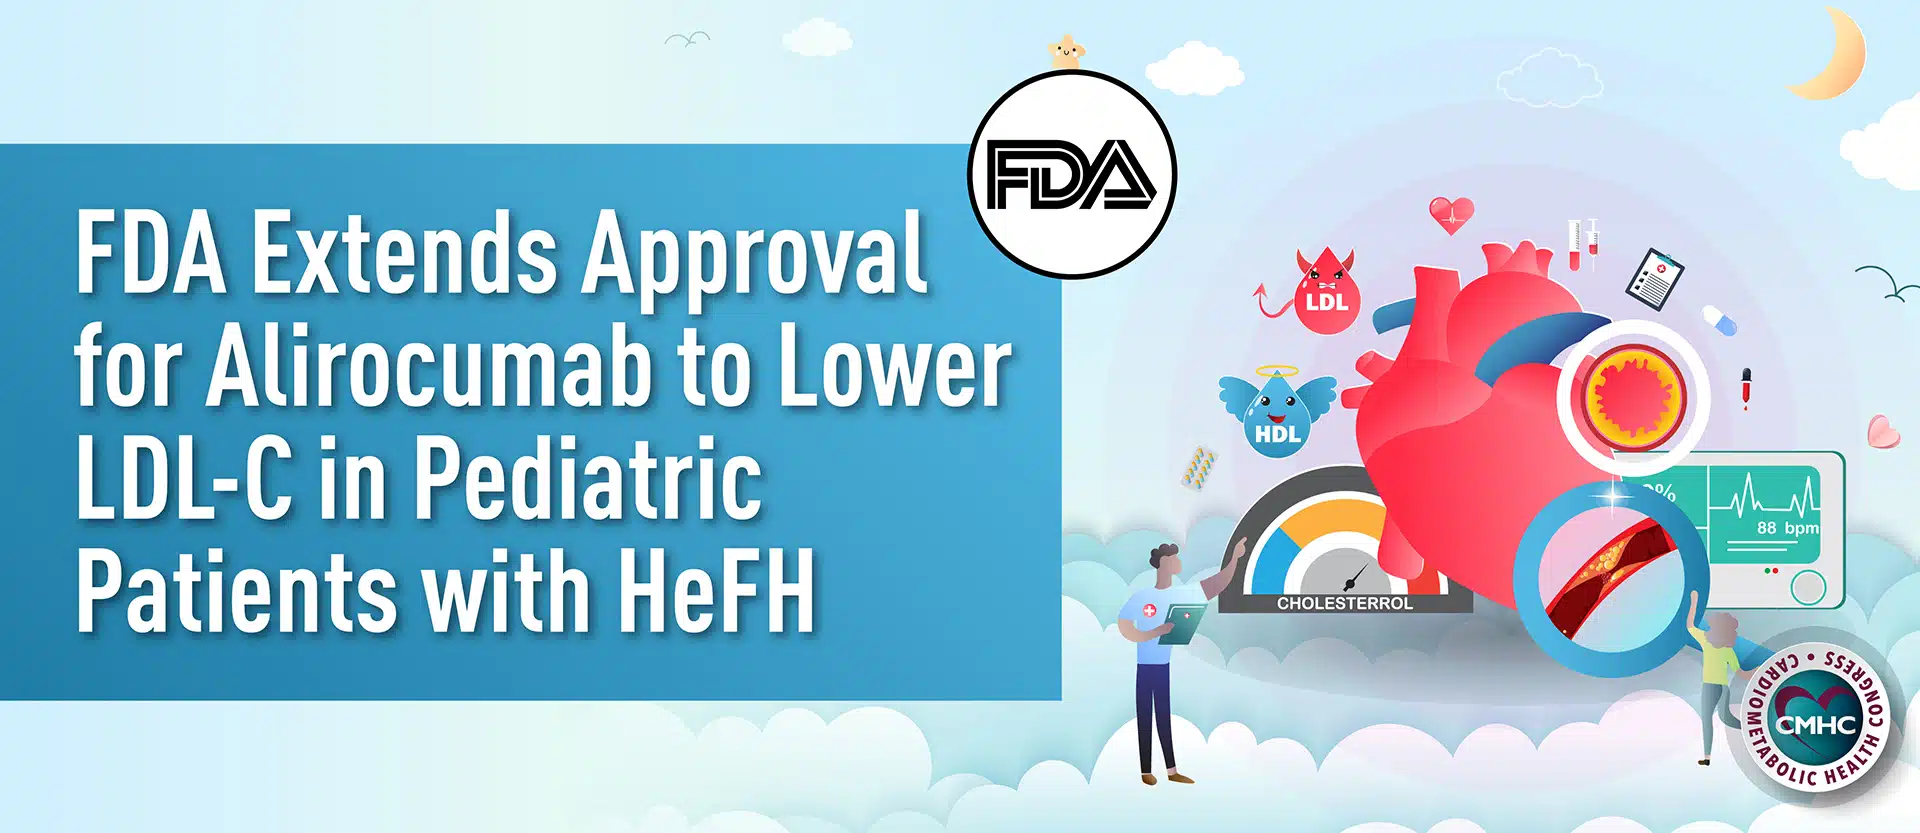 FDA Extends Approval for Alirocumab to Lower LDL-C in Pediatric Patients with HeFH 